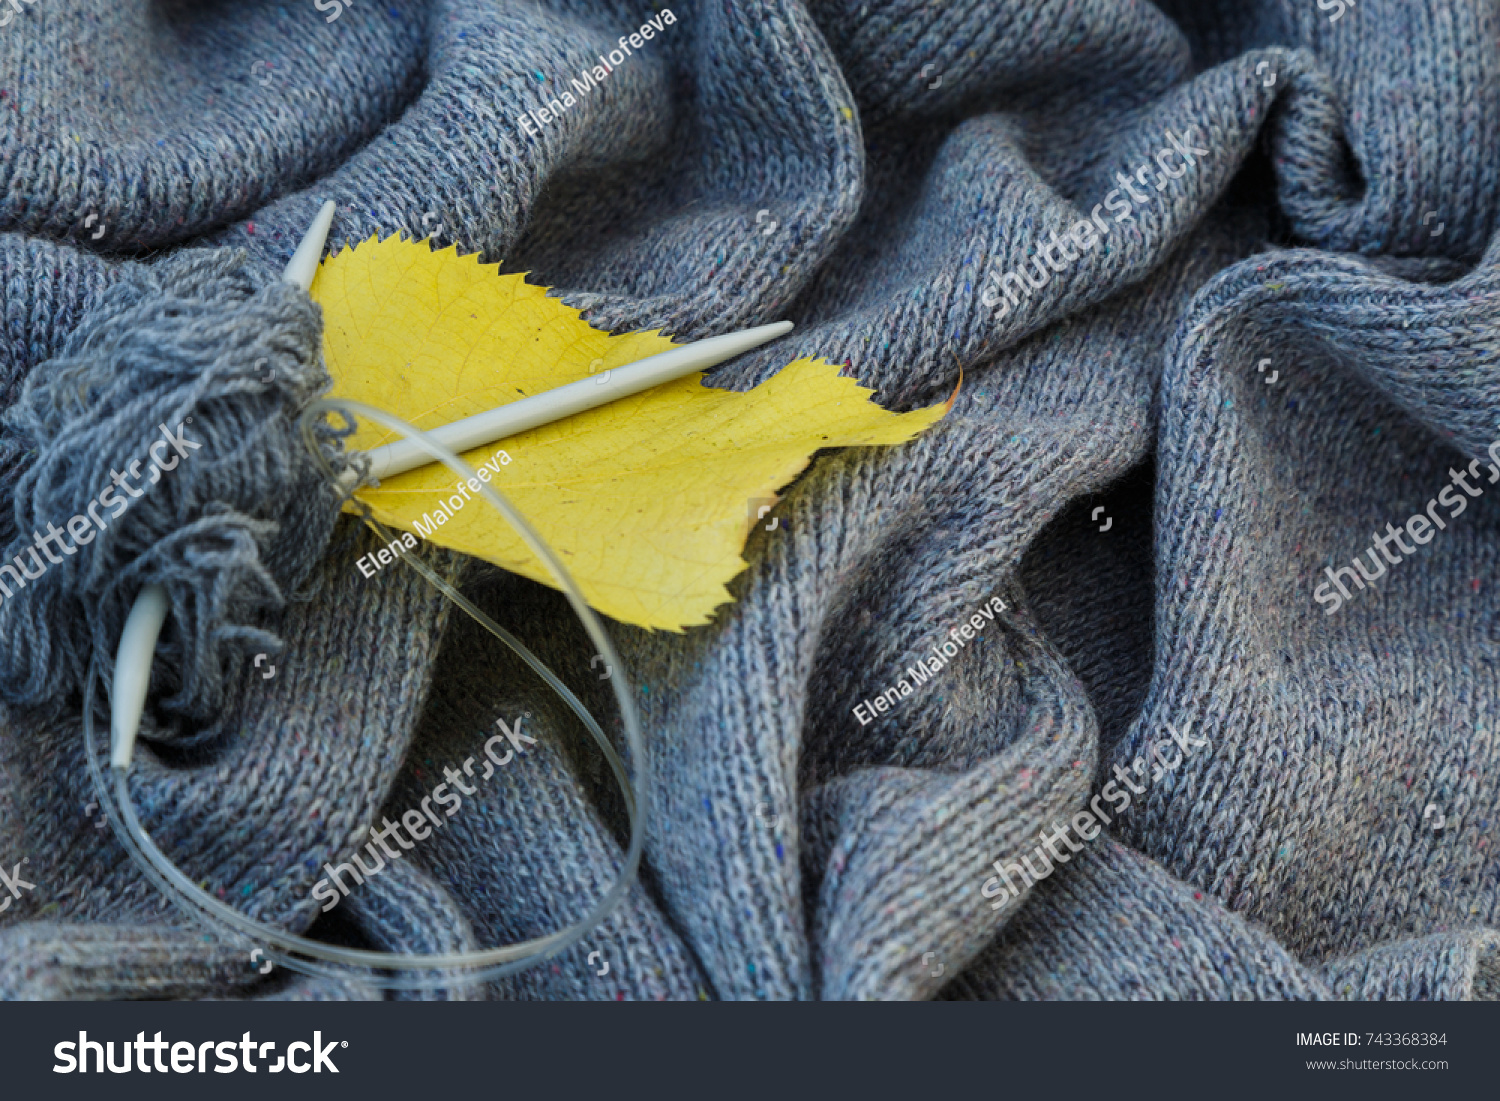 background of knitted gray linen of goat's wool made with knitting needles or on a knitting machine laid in waves with metal knitting needles, yellow aspen leaf and red chrysanthemum flower. #743368384